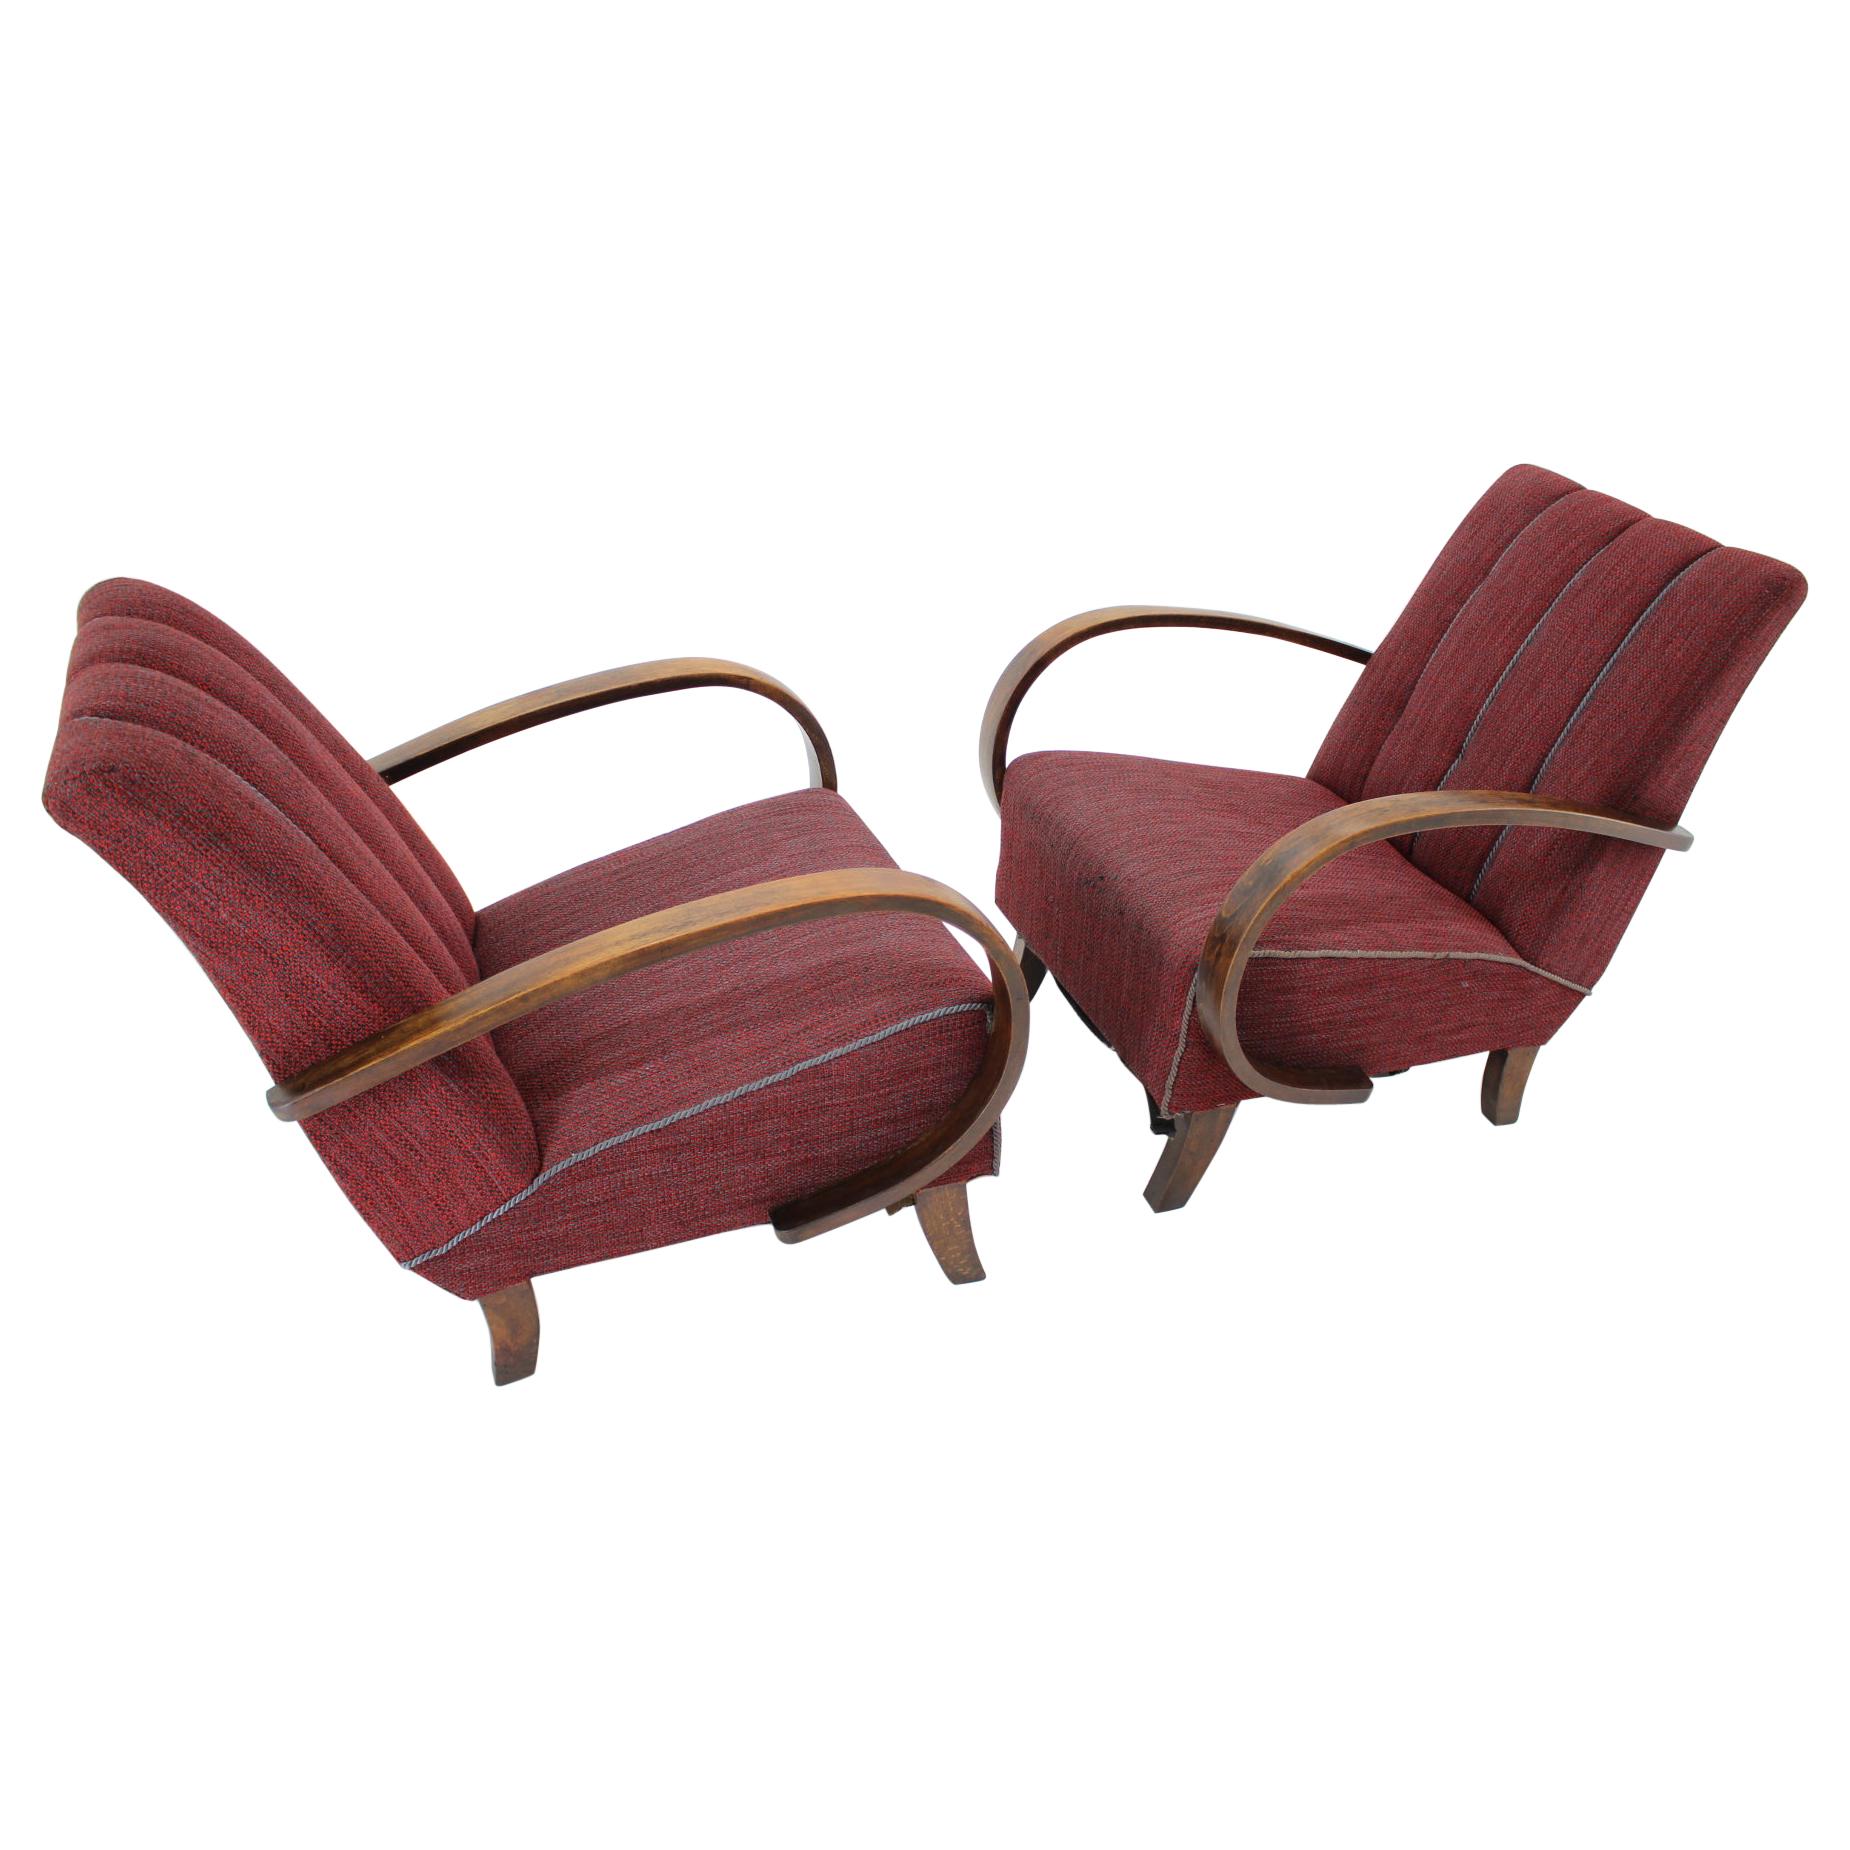 Pair of Armchairs Designed by Jindrich Halabala, 1950s For Sale